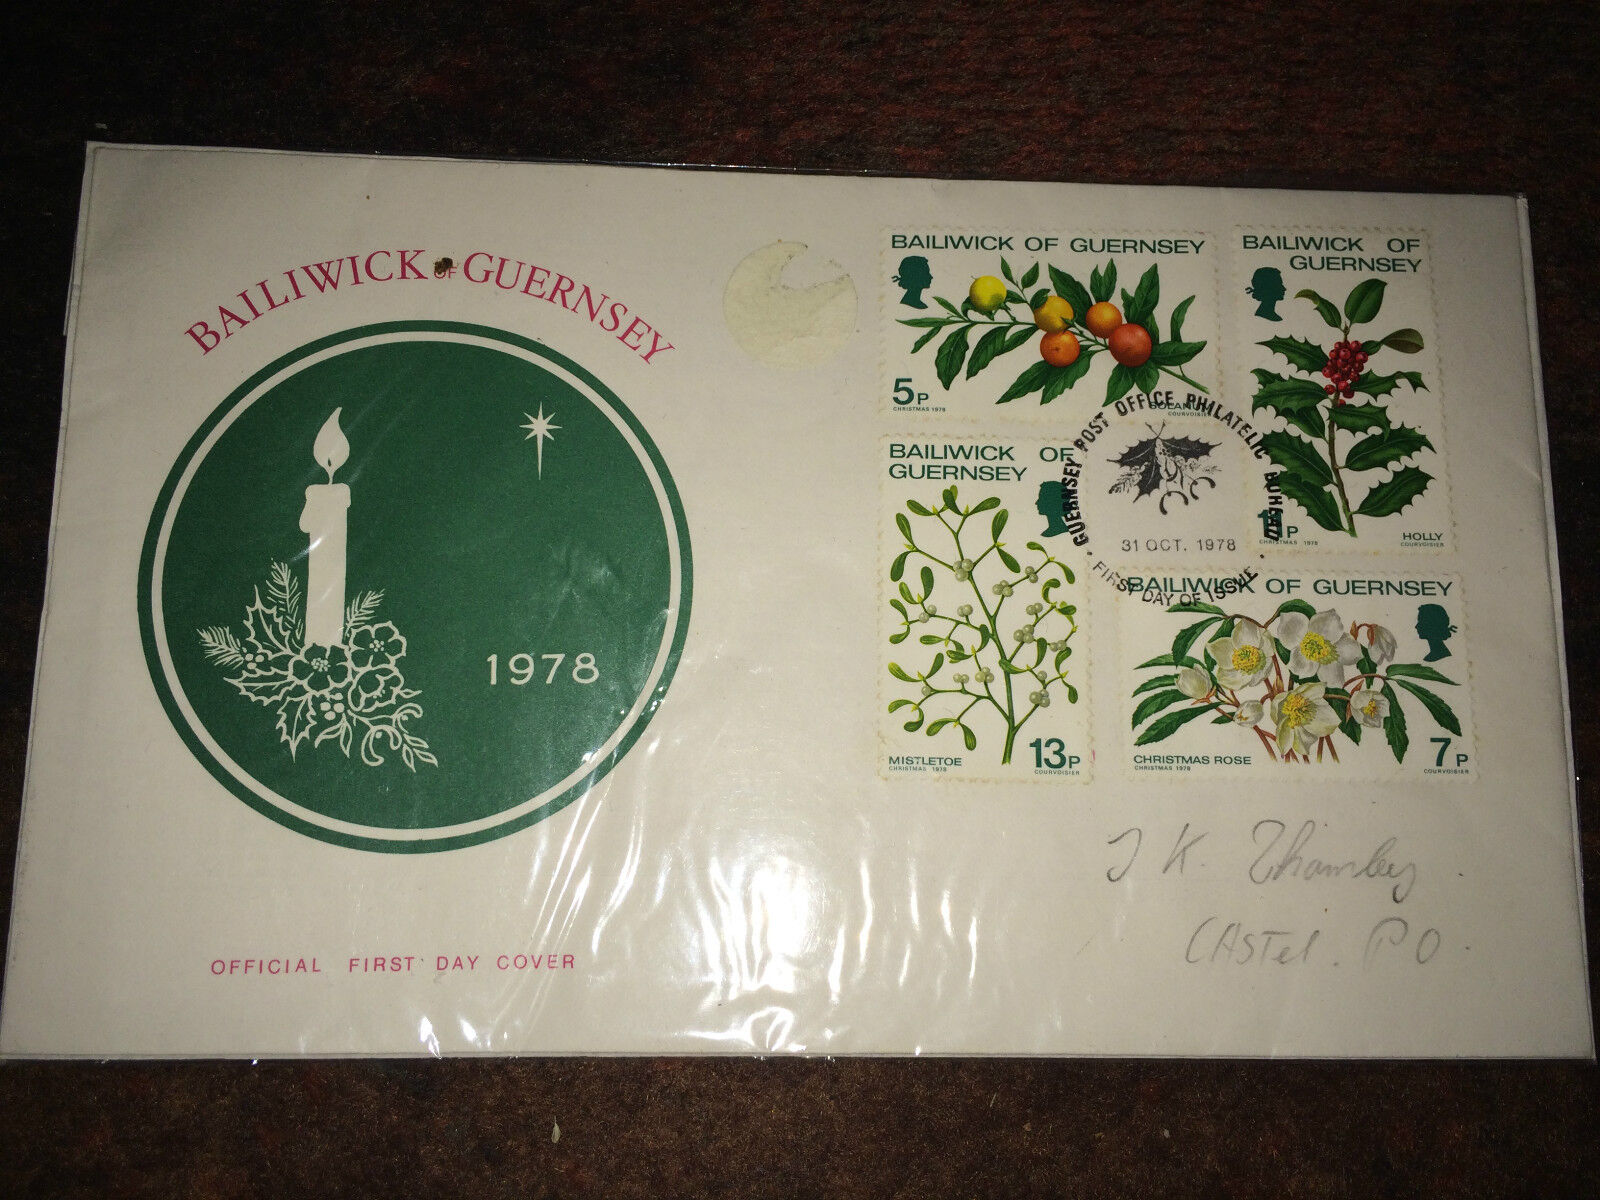 GB Stamps - QEII - Bailiwick of Guernsey First Day Cover 1978